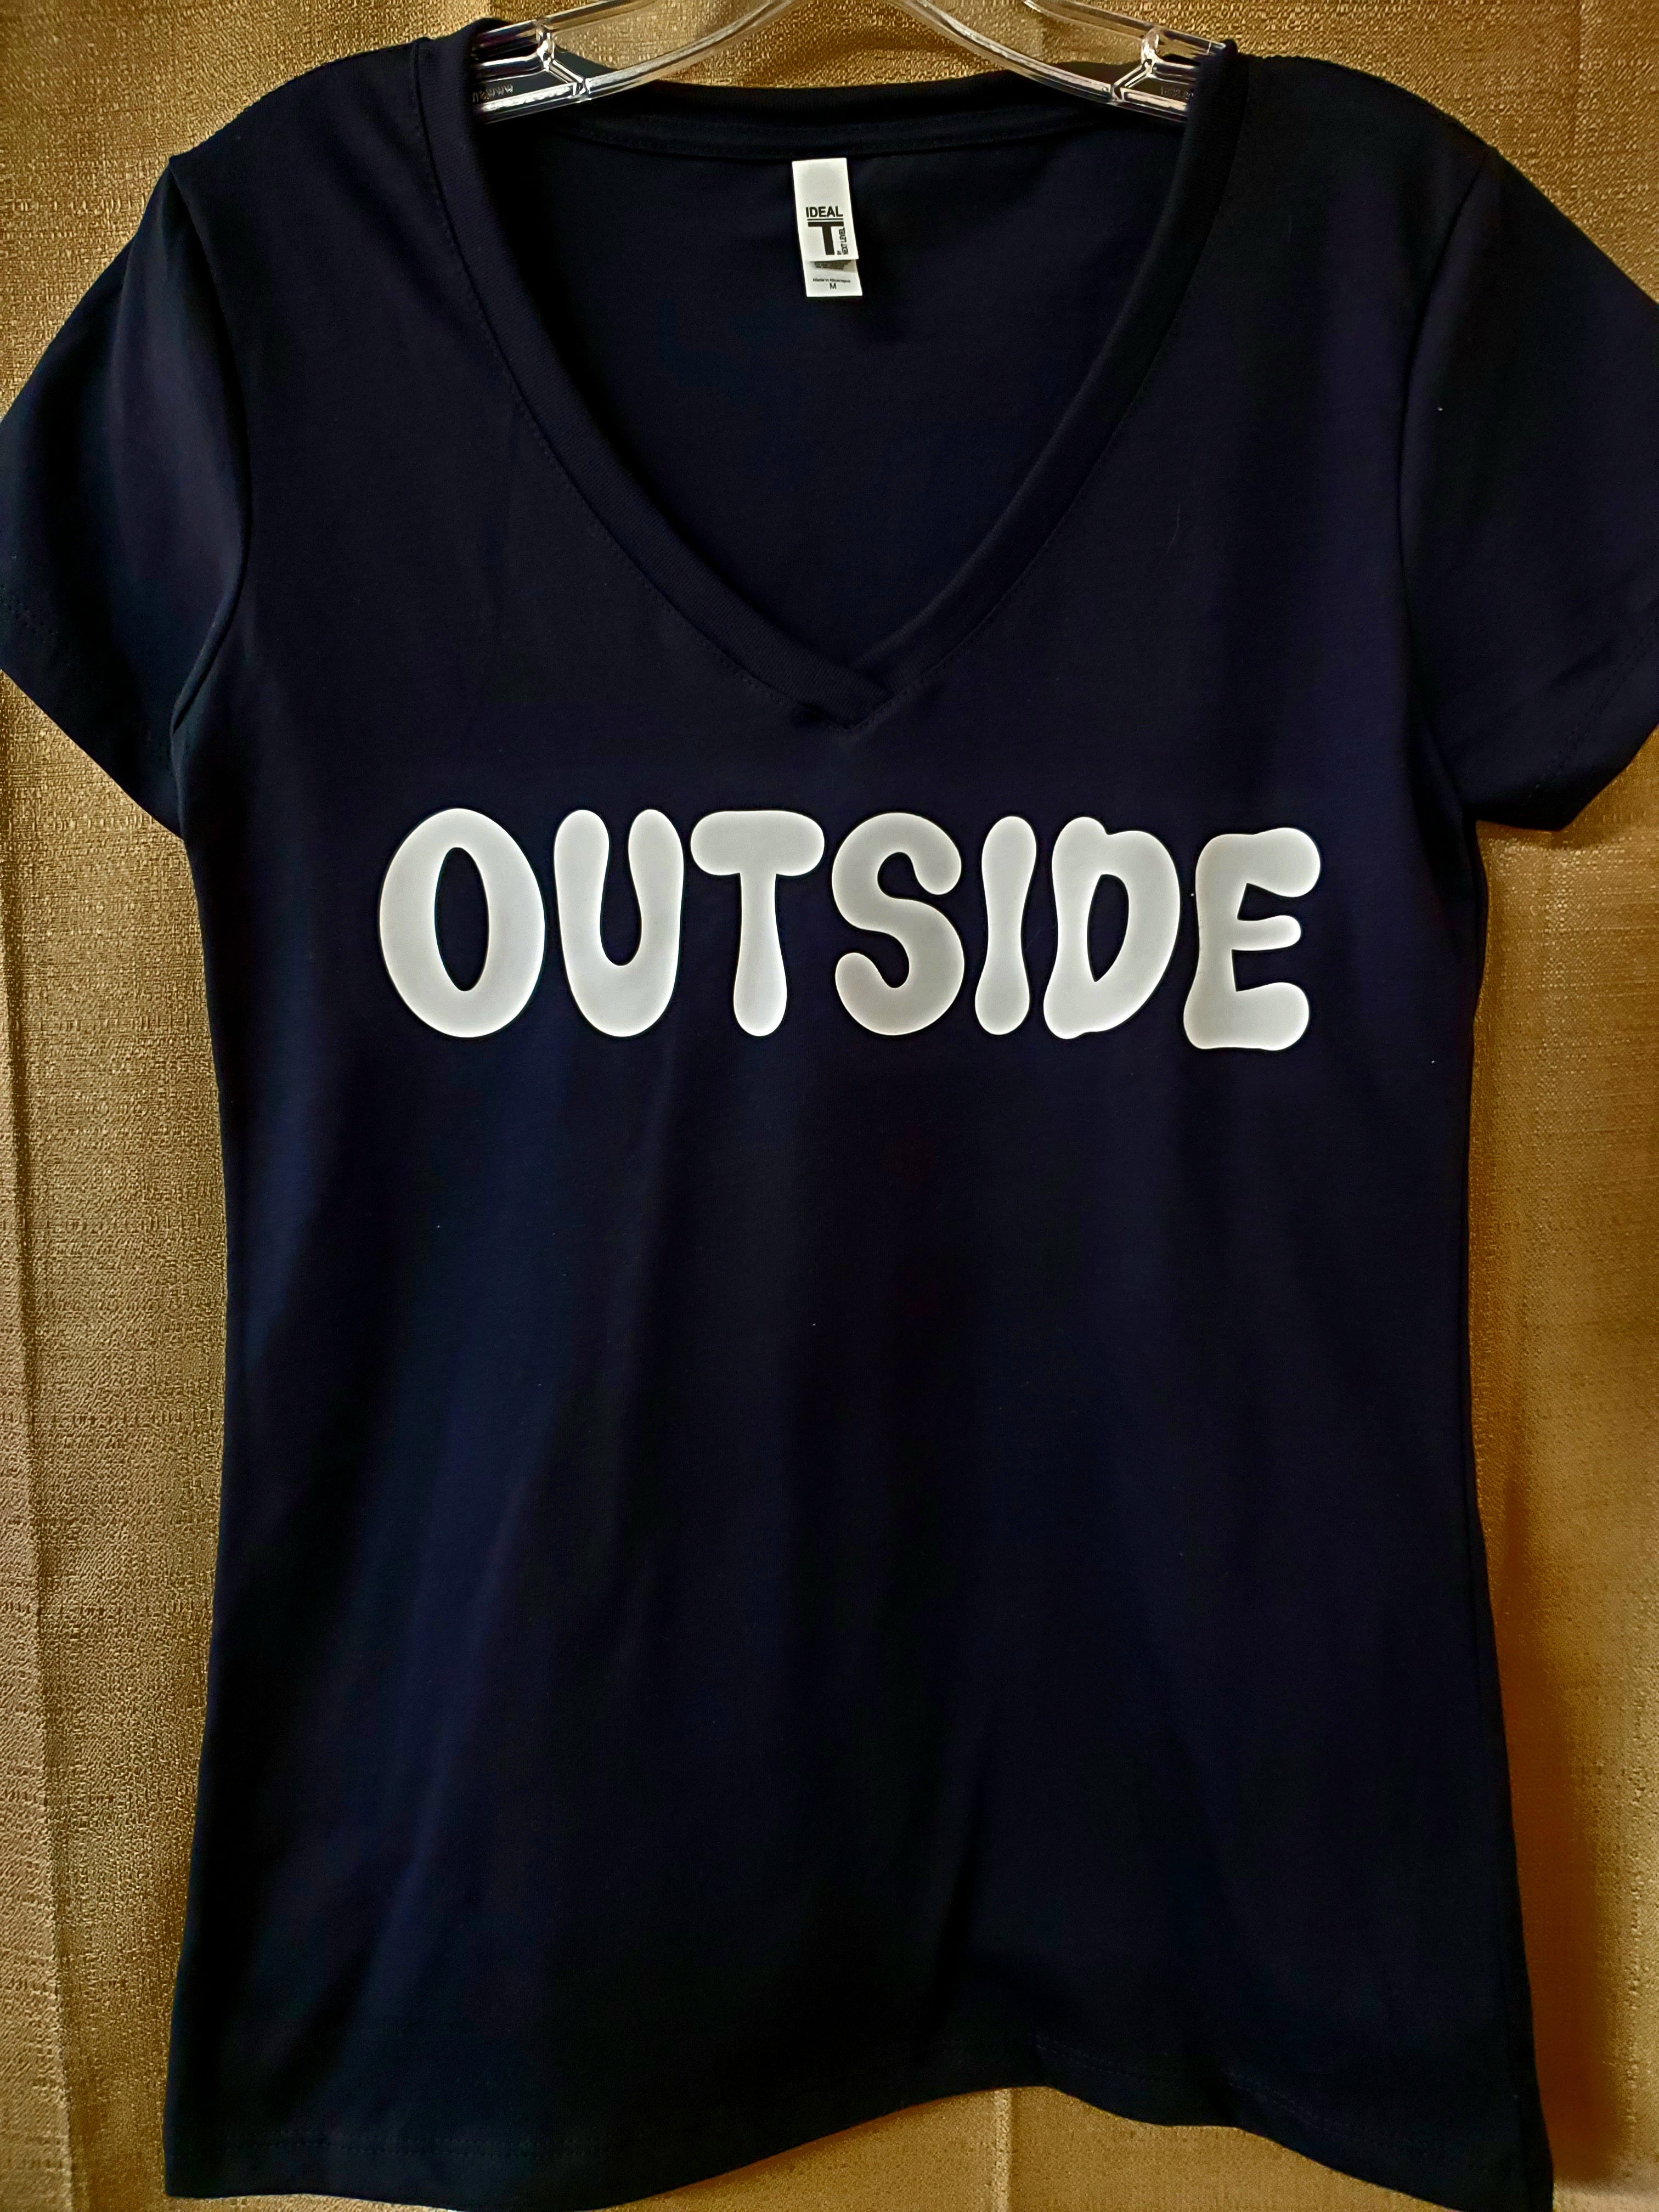 "OUTSIDE" vnecks black/white (fitted and run small)